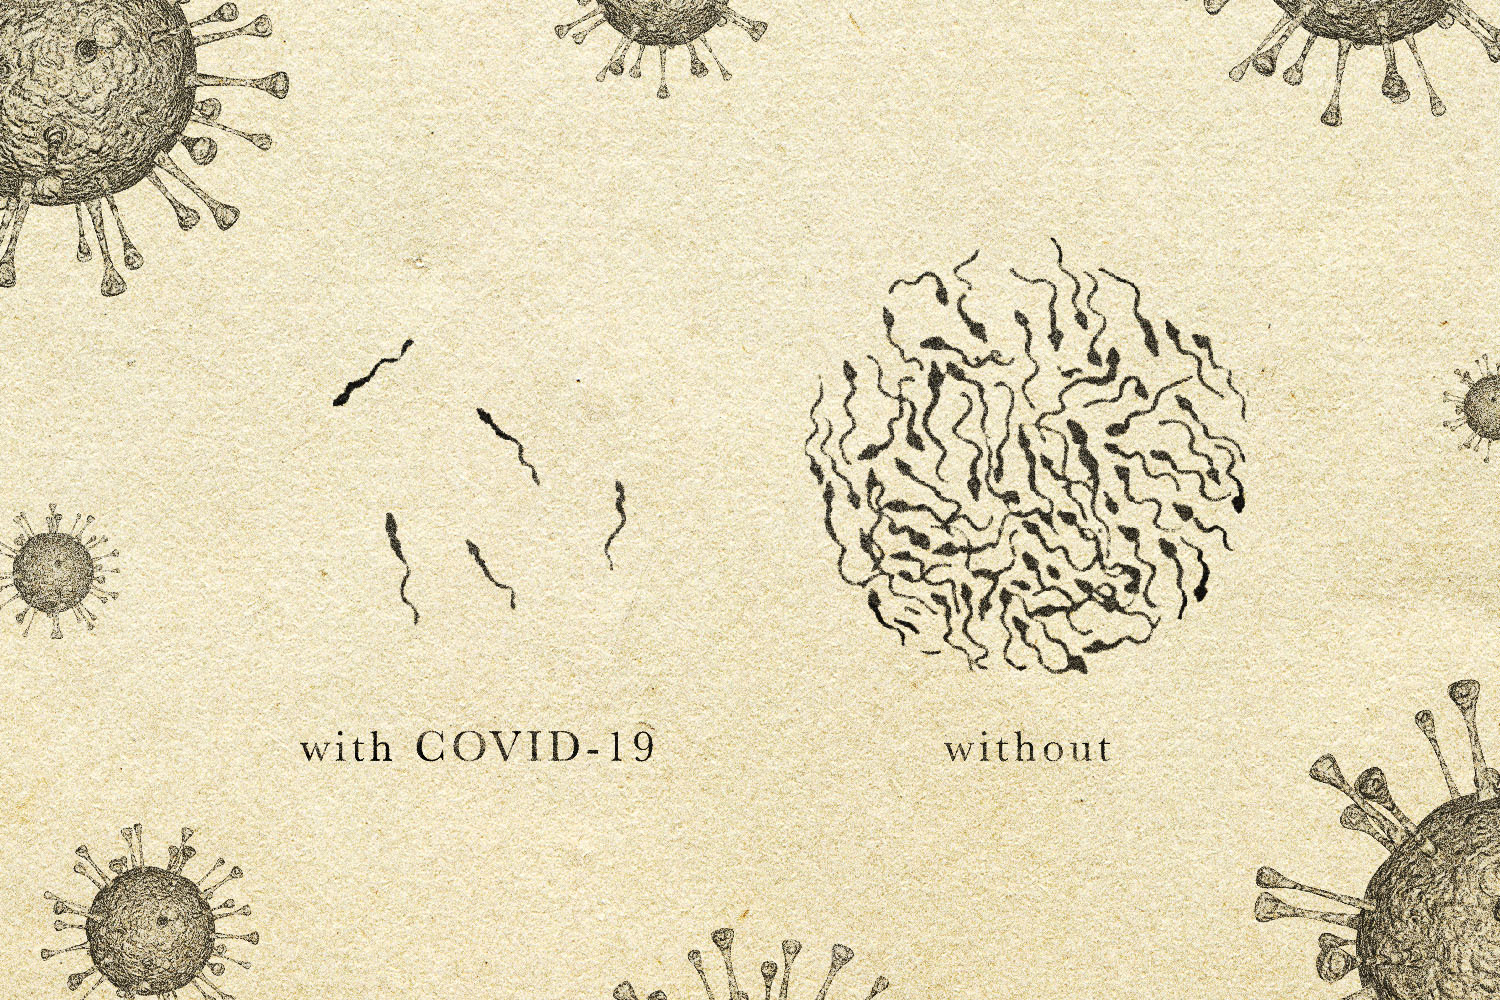 A diagram of sperm under a microscope. On the left: a small amount of sperm with the label "with COVID-19. On the right: a lot of sperm with the label "without."